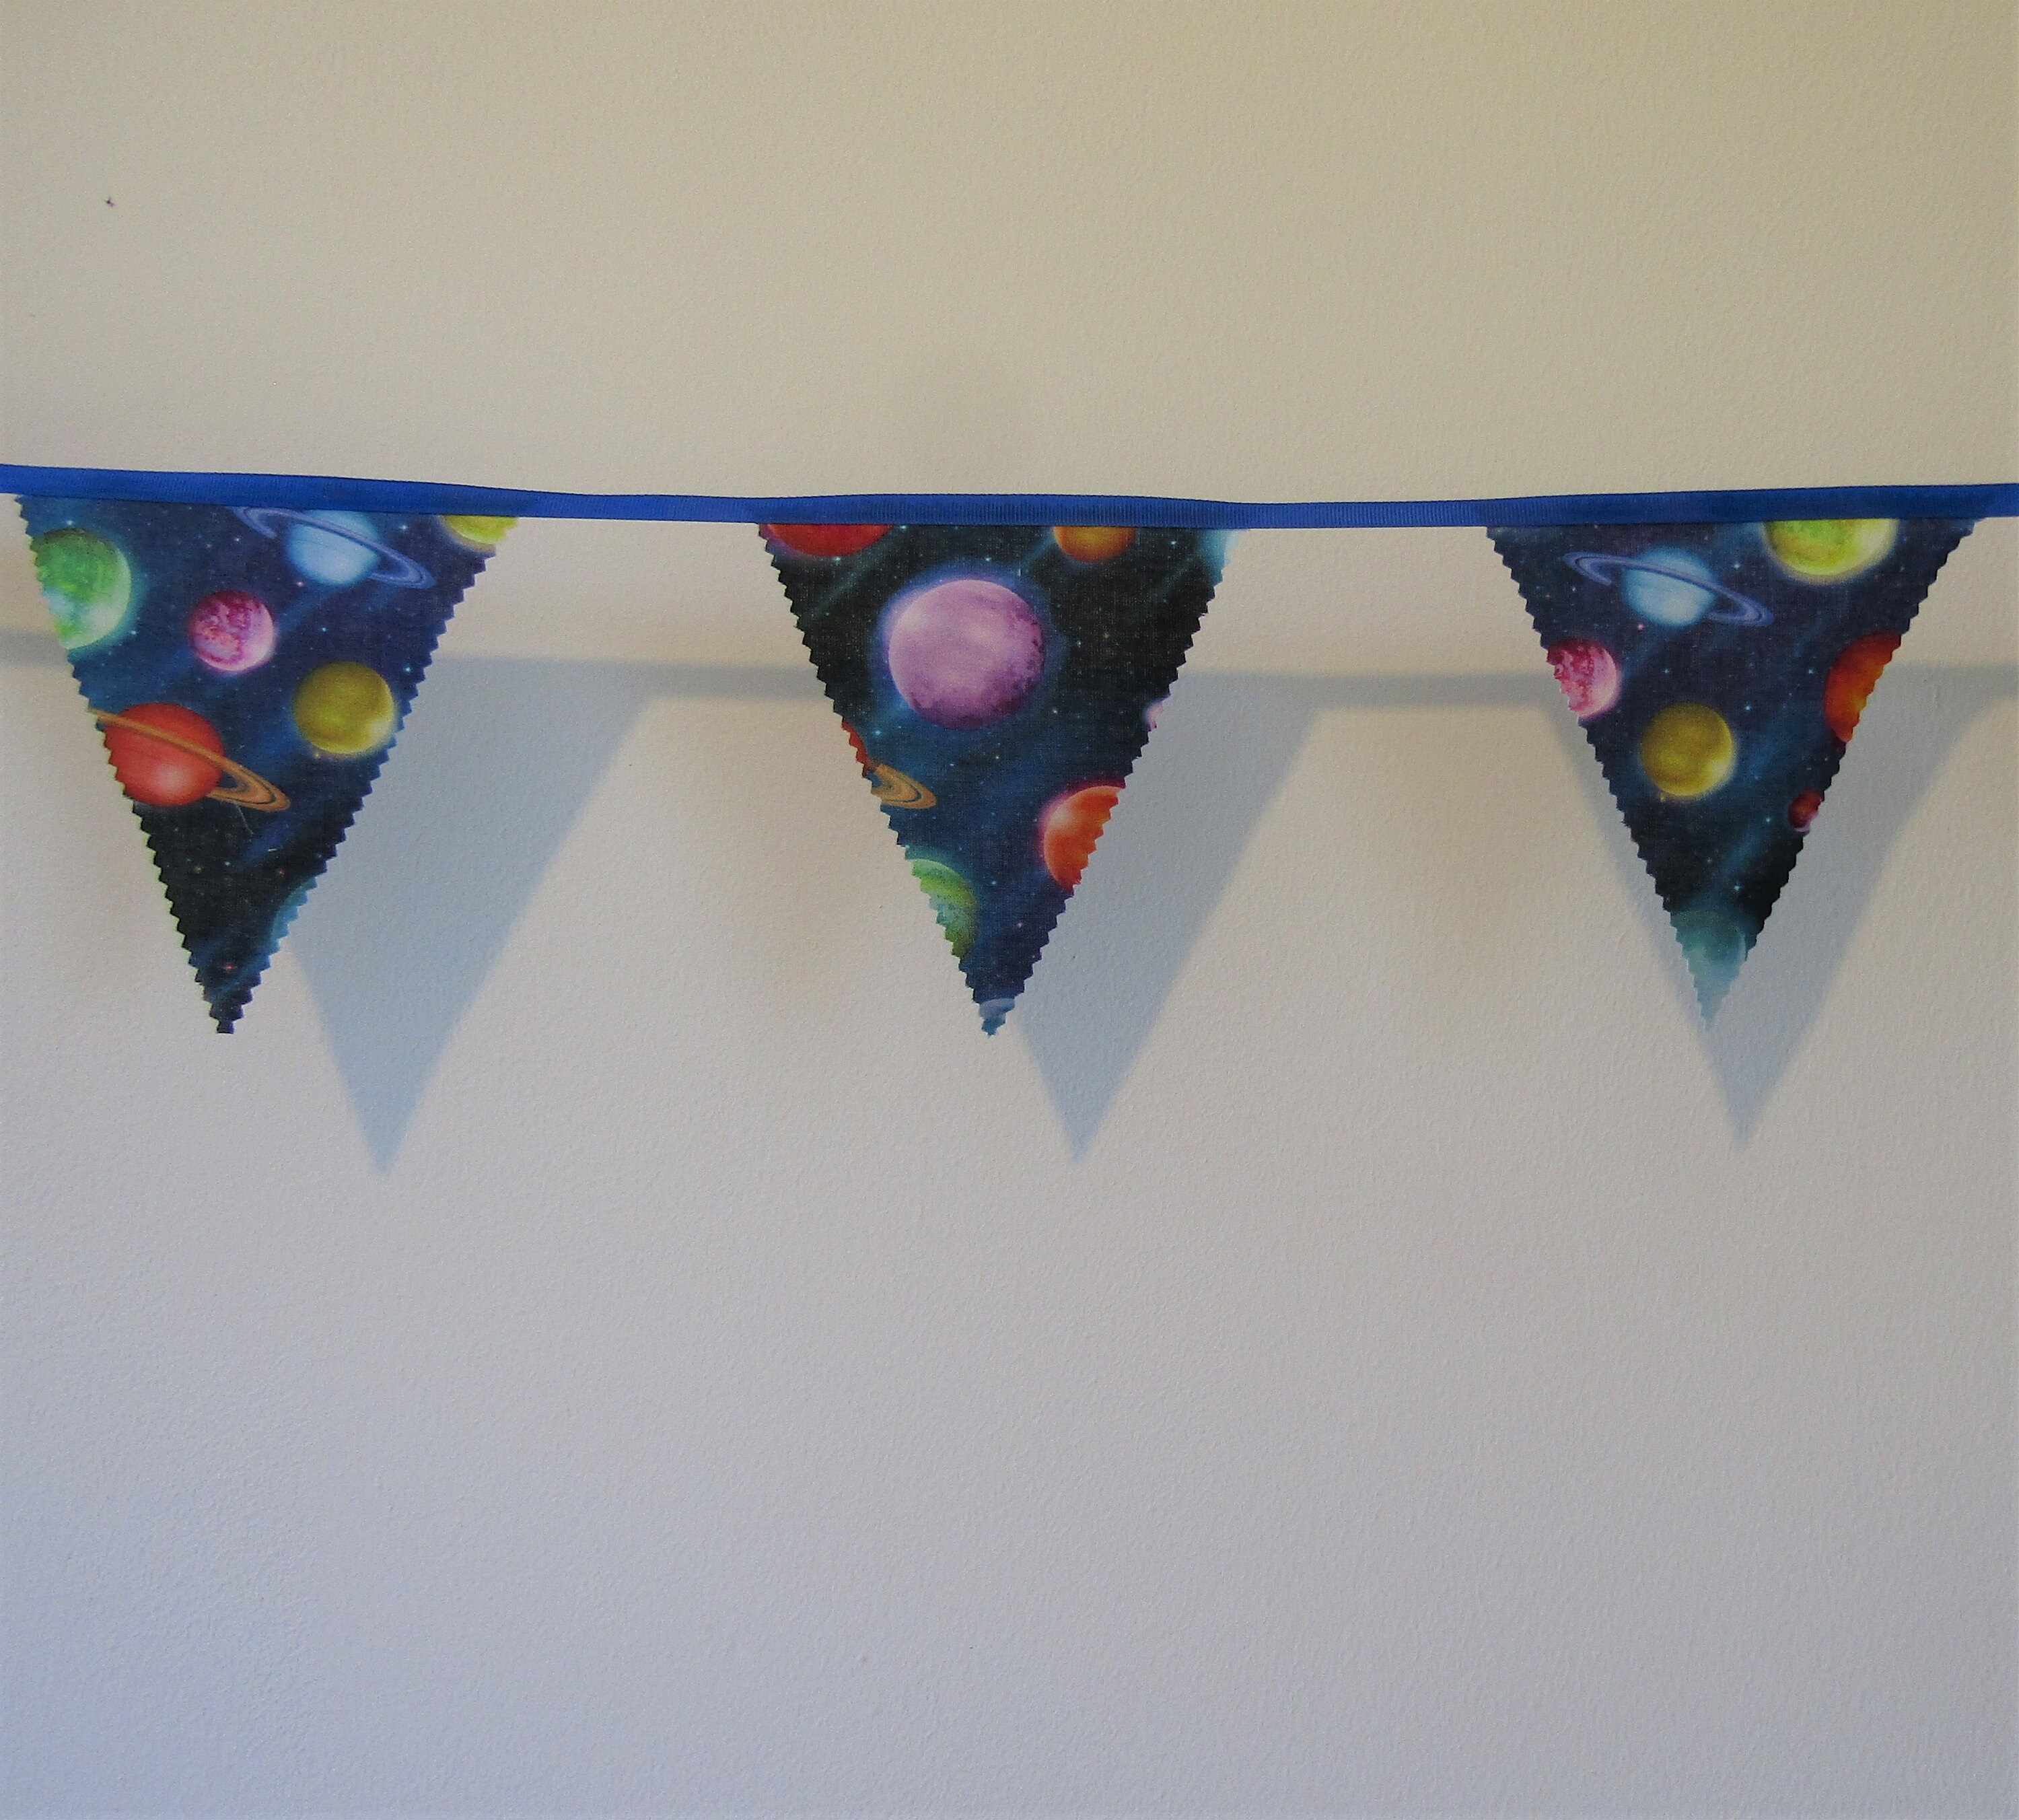 Space Bunting Galaxy Bedroom Planets decor Moons  fabric banner